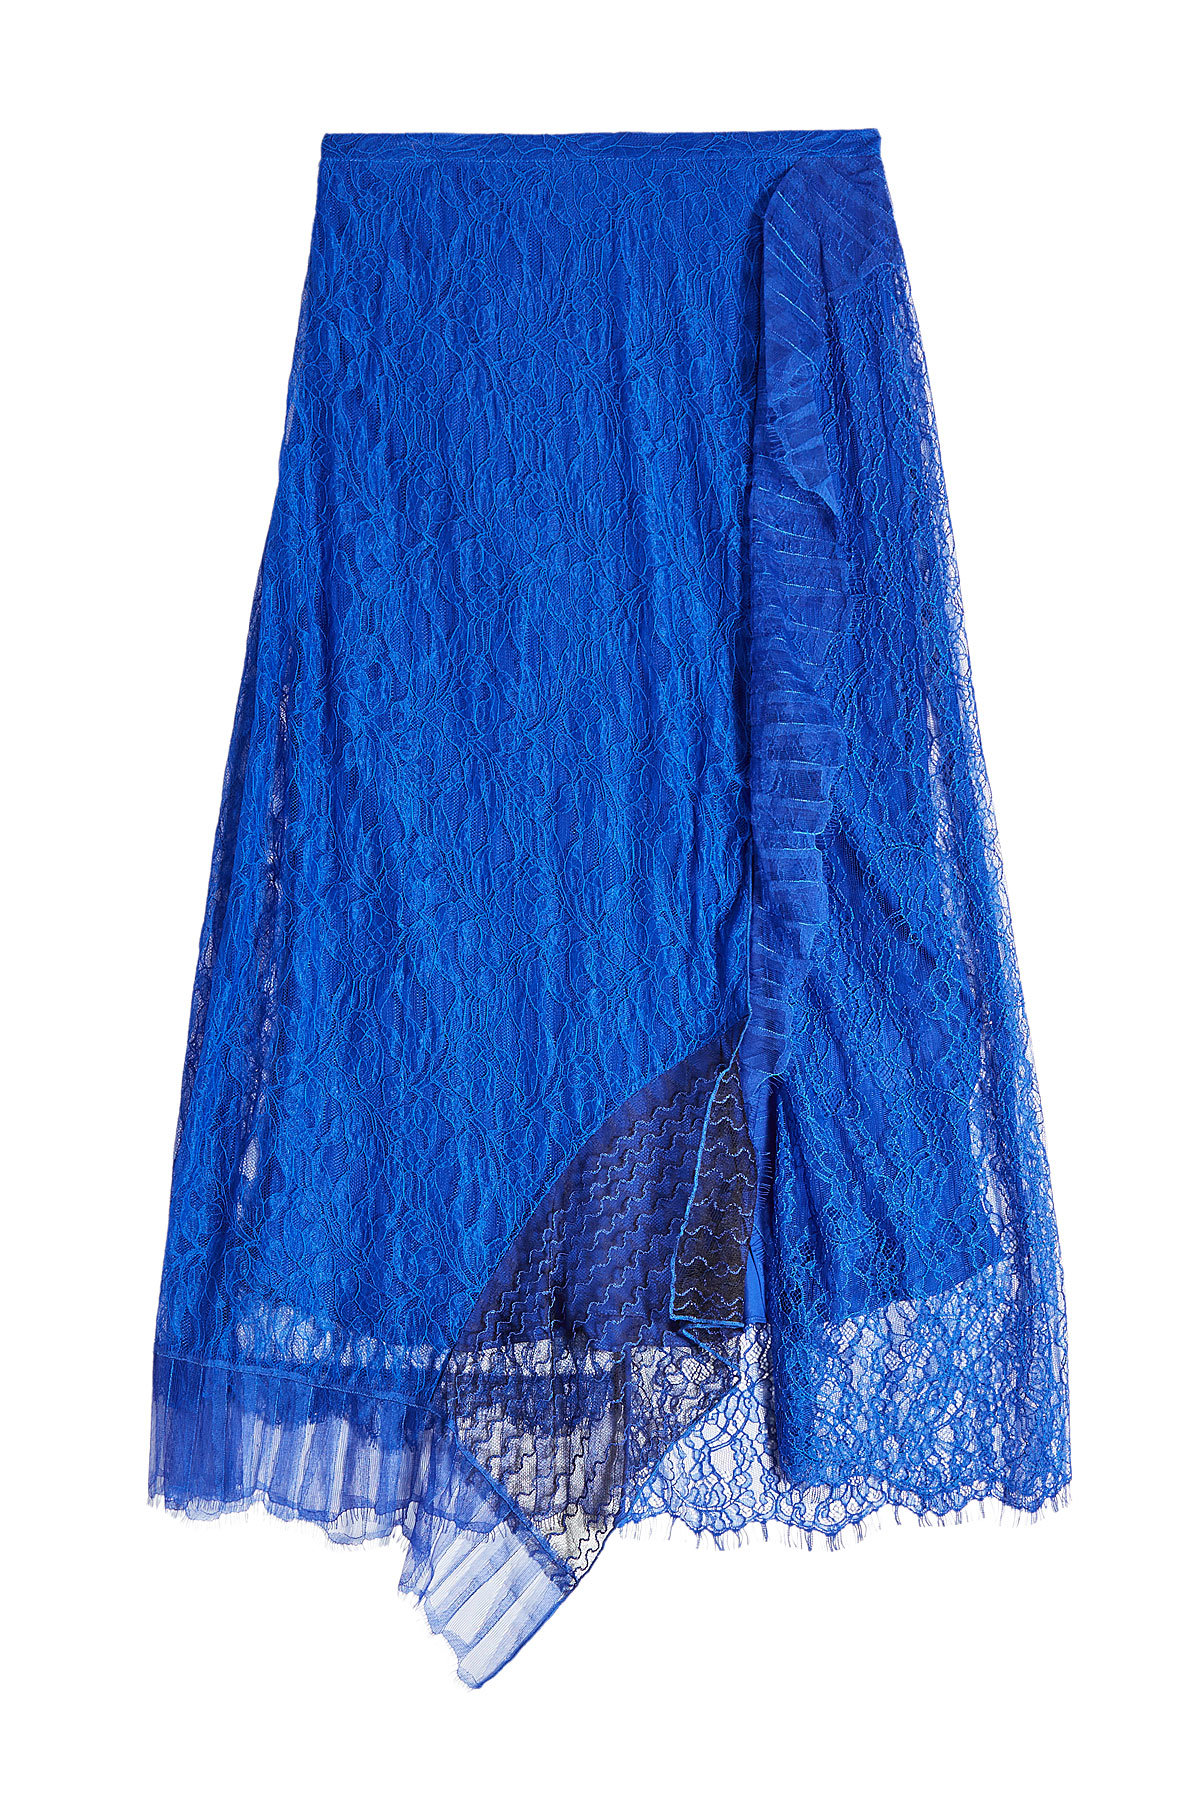 3.1 Phillip Lim - Skirt with Lace and Mesh